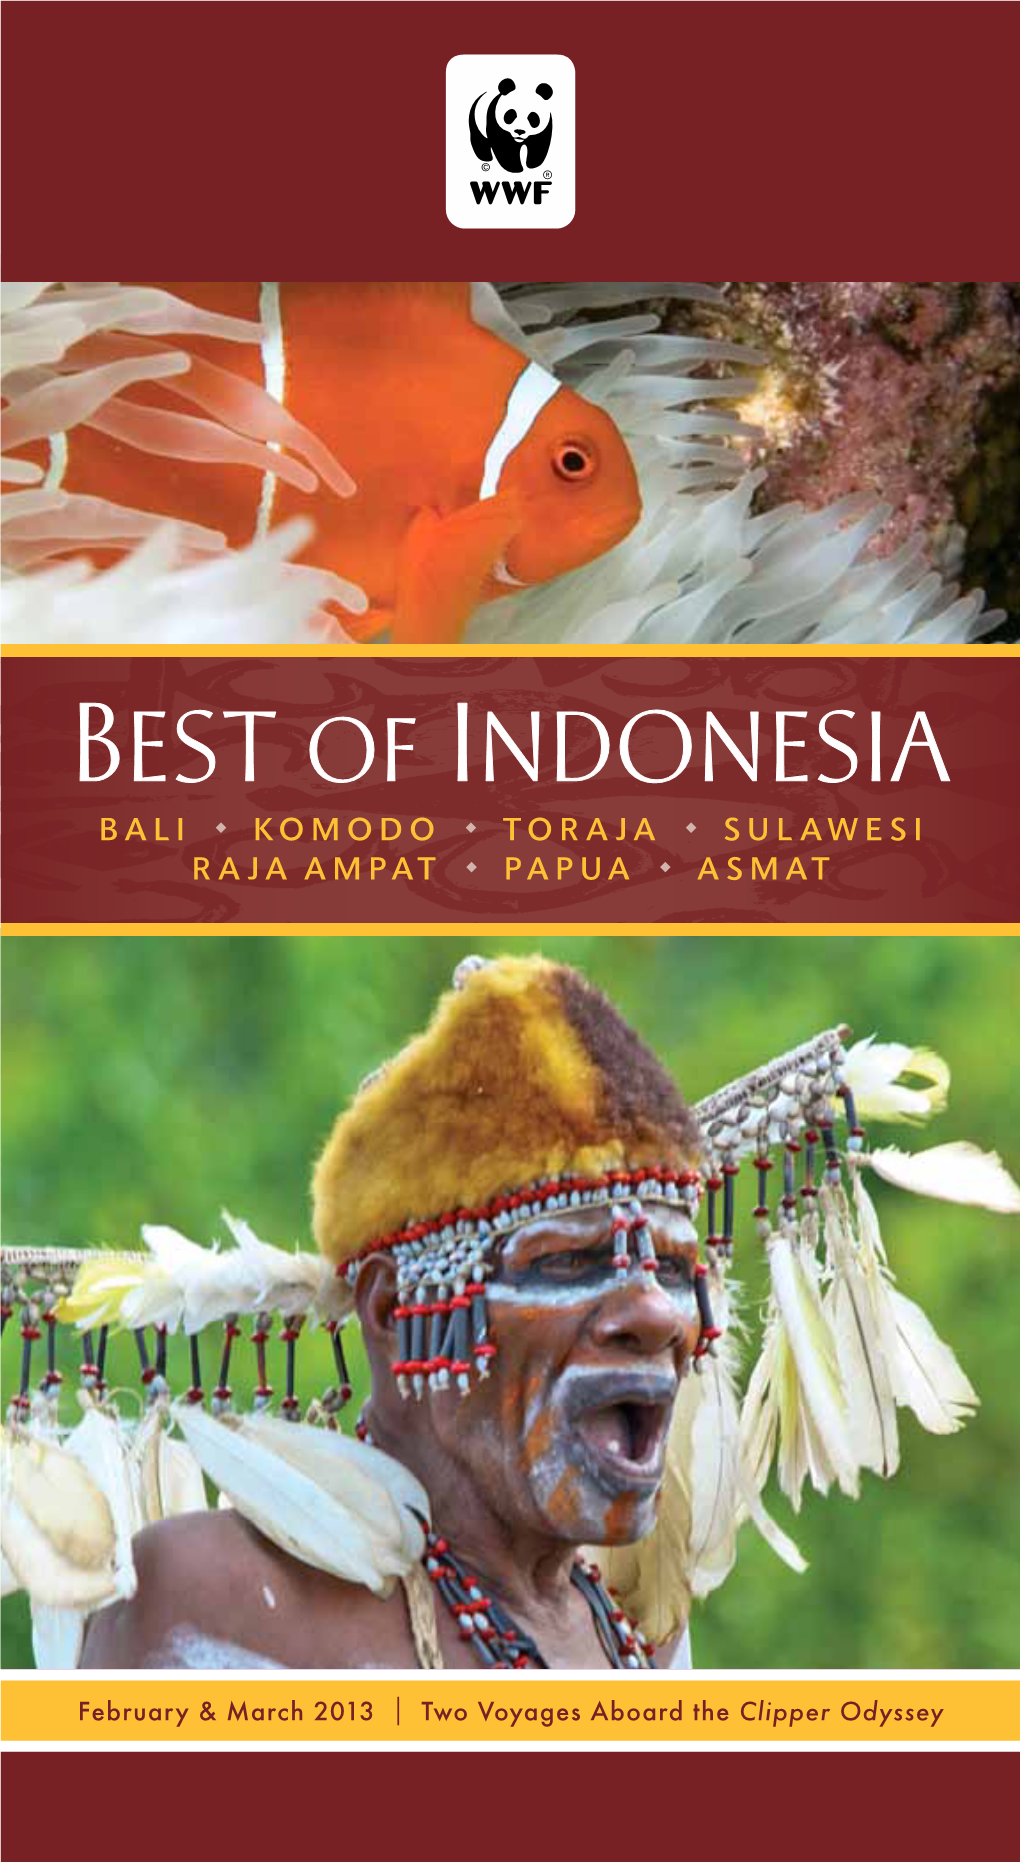 BEST of INDONESIA Wildlife and Enjoy World-Class Snorkeling and Diving